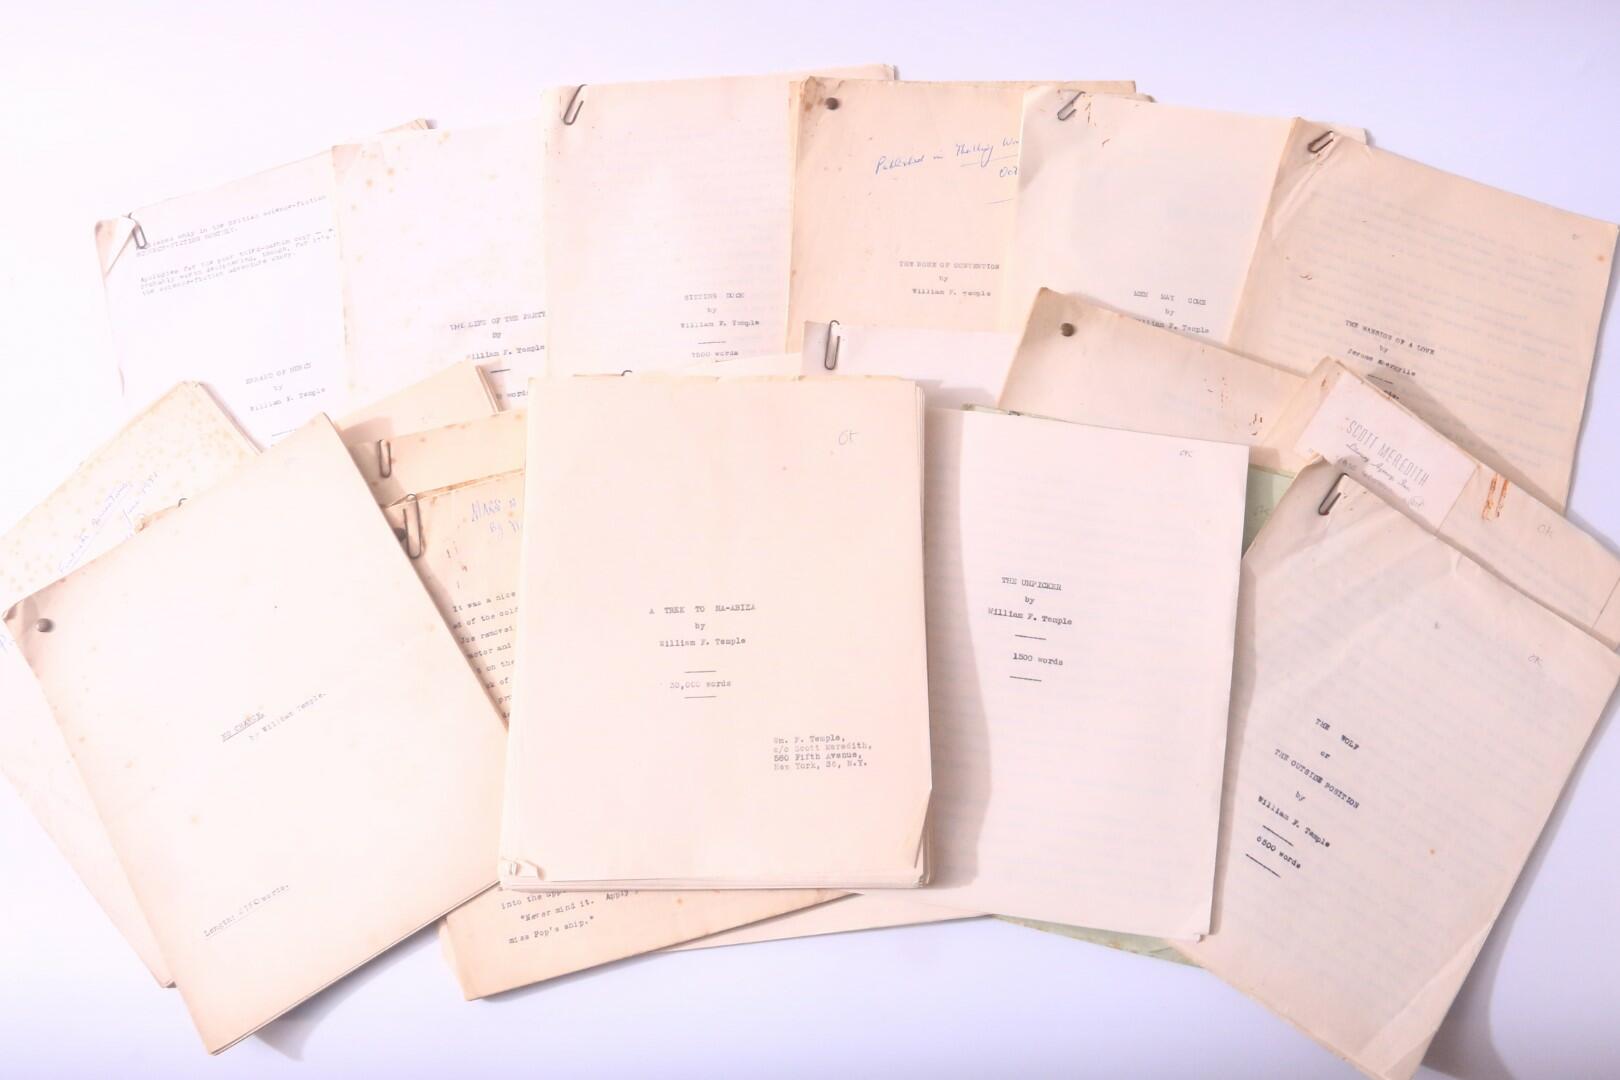 William F. Temple - A Collection of 21 Typescripts - No Publisher, nd [1950s], Manuscript.